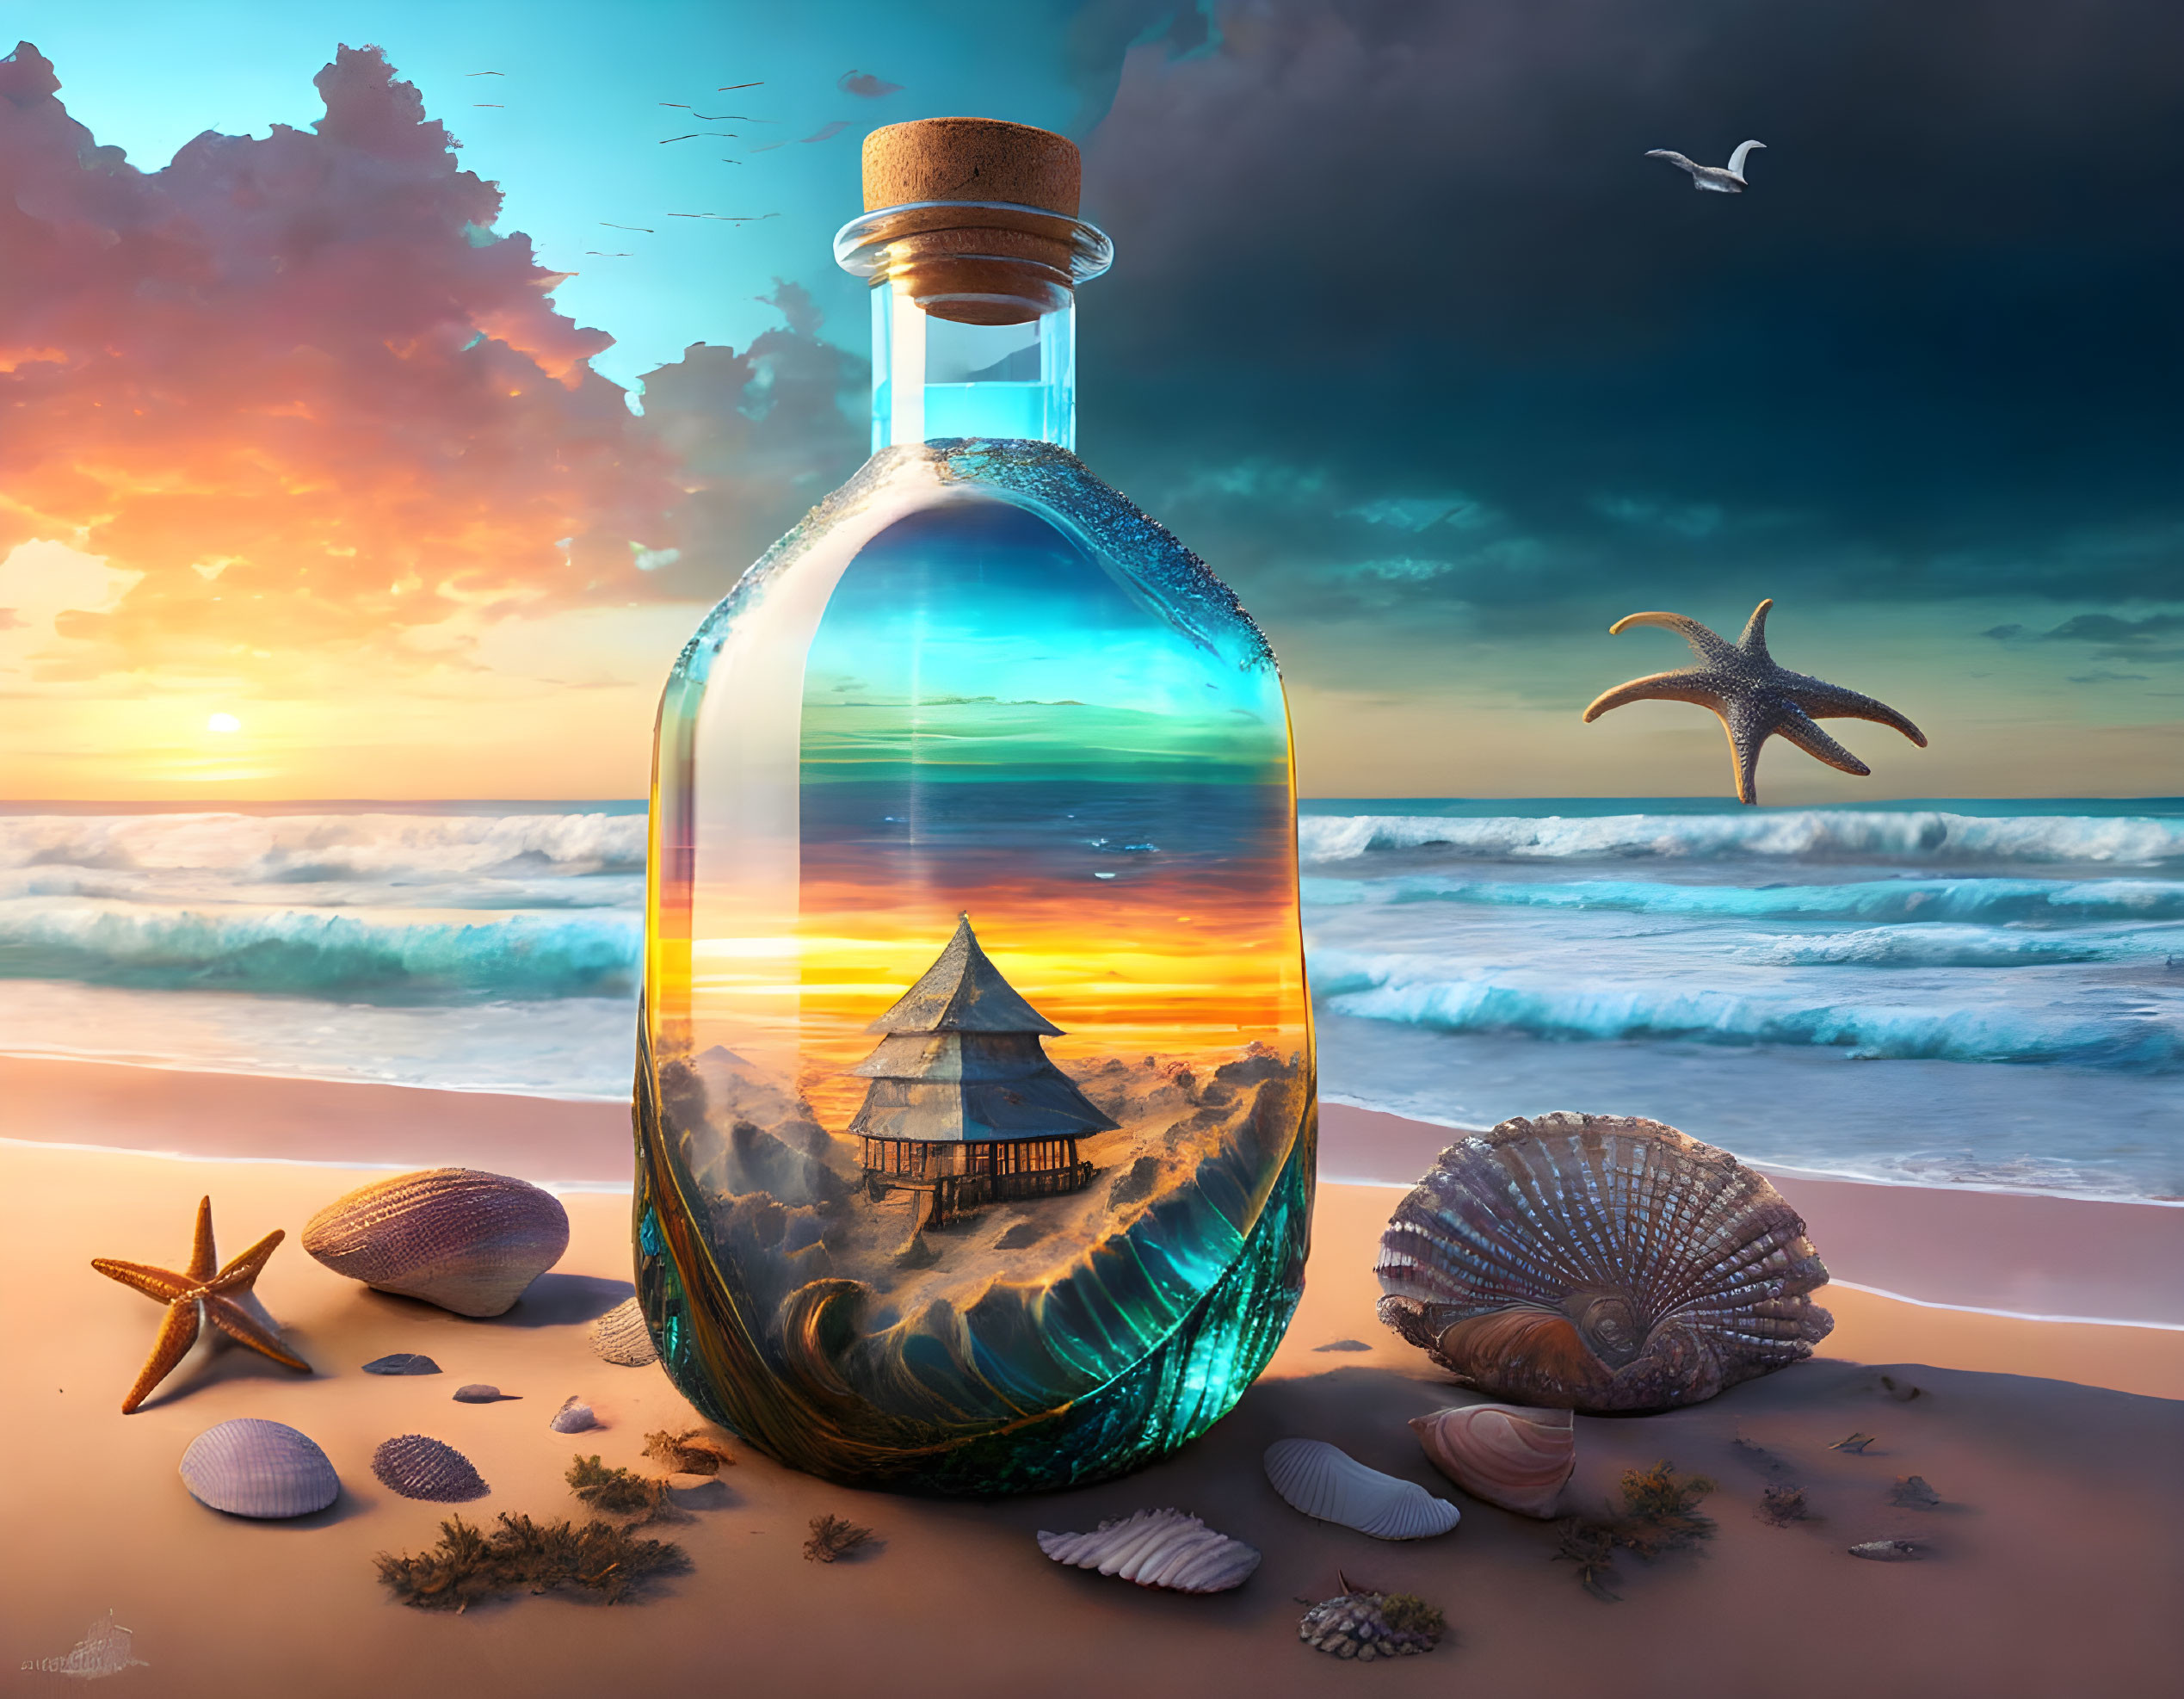 Surreal ocean sunset scene in a large bottle with beach hut and seashells